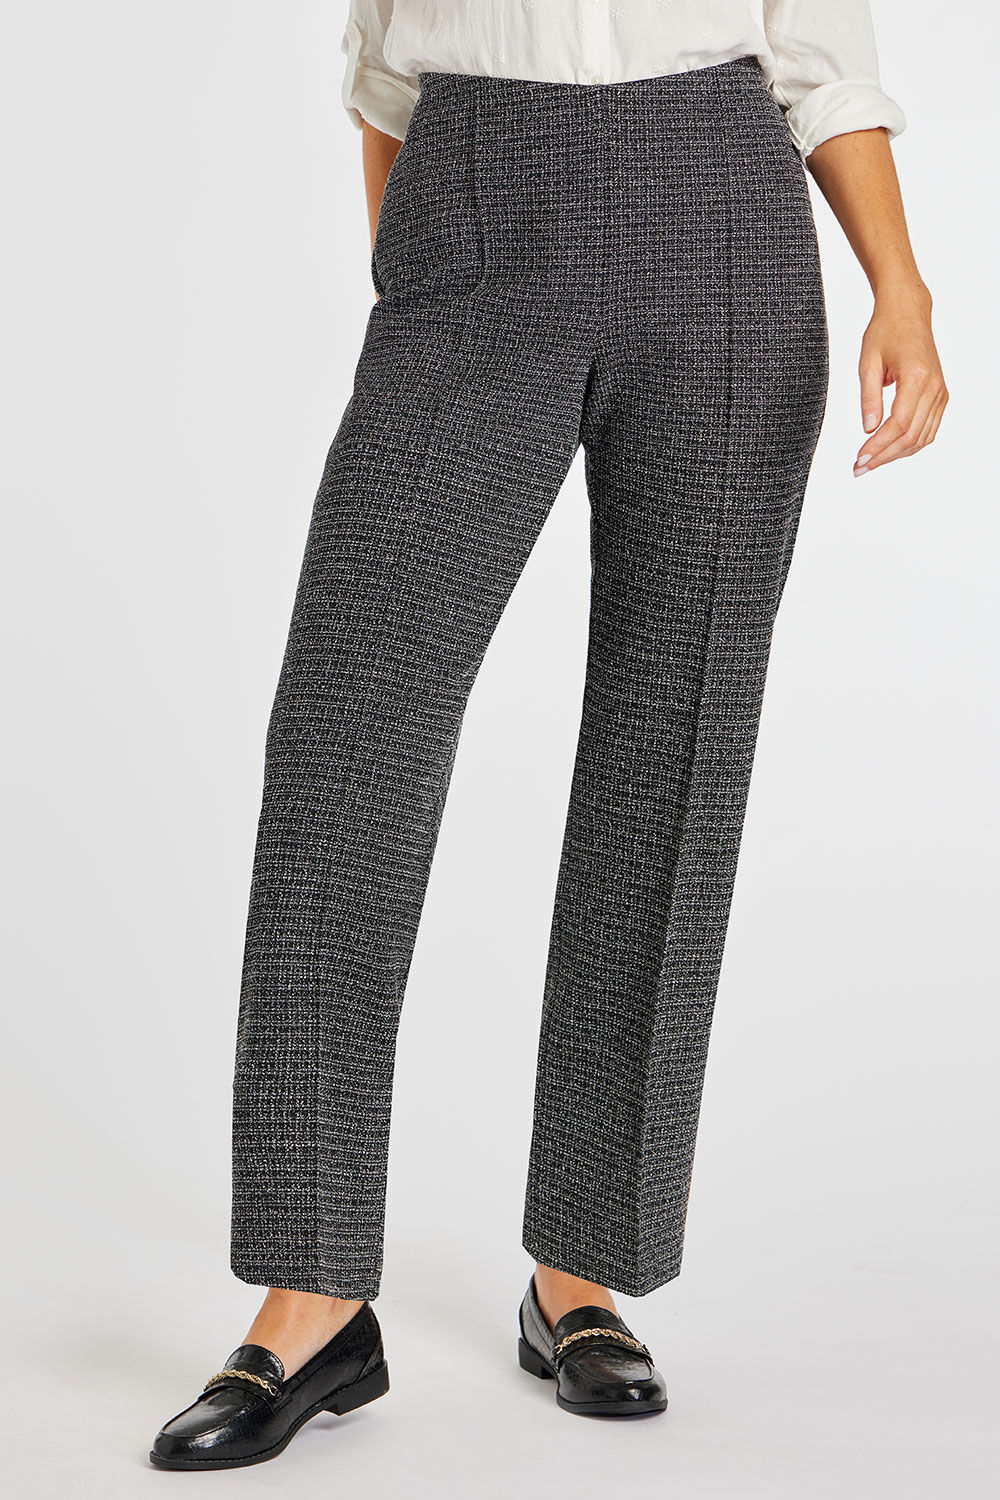 Bonmarche Charcoal Checked Jacquard Pleated Front Elasticated Trousers, Size: 14